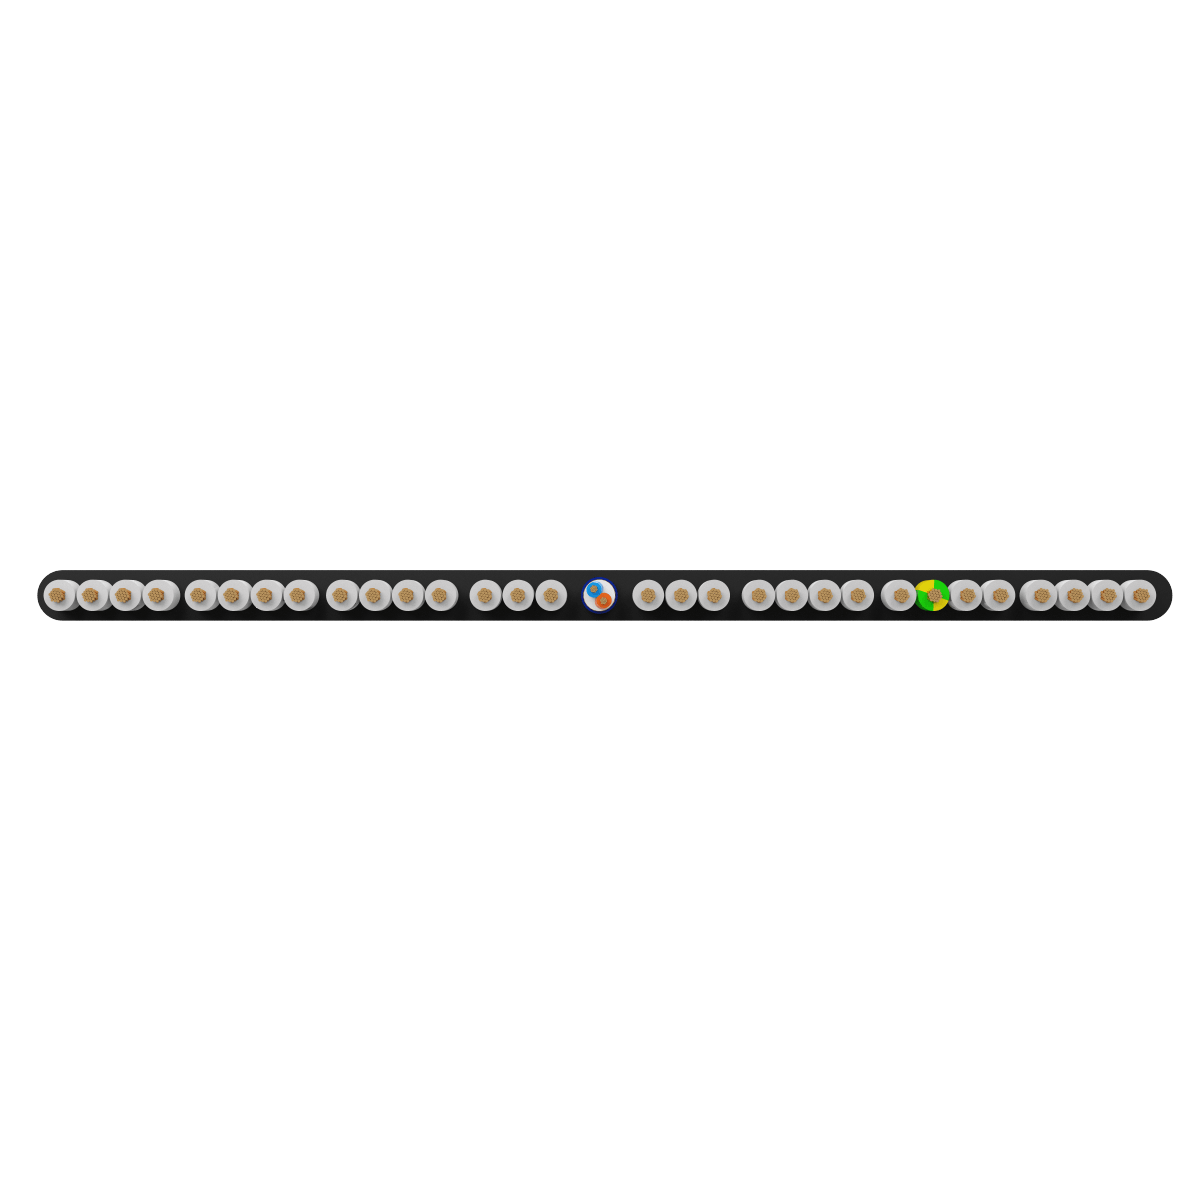 30x0.75 +1Px(2x0.22) mm² H05VVH6-F Foiled Elevator Cable